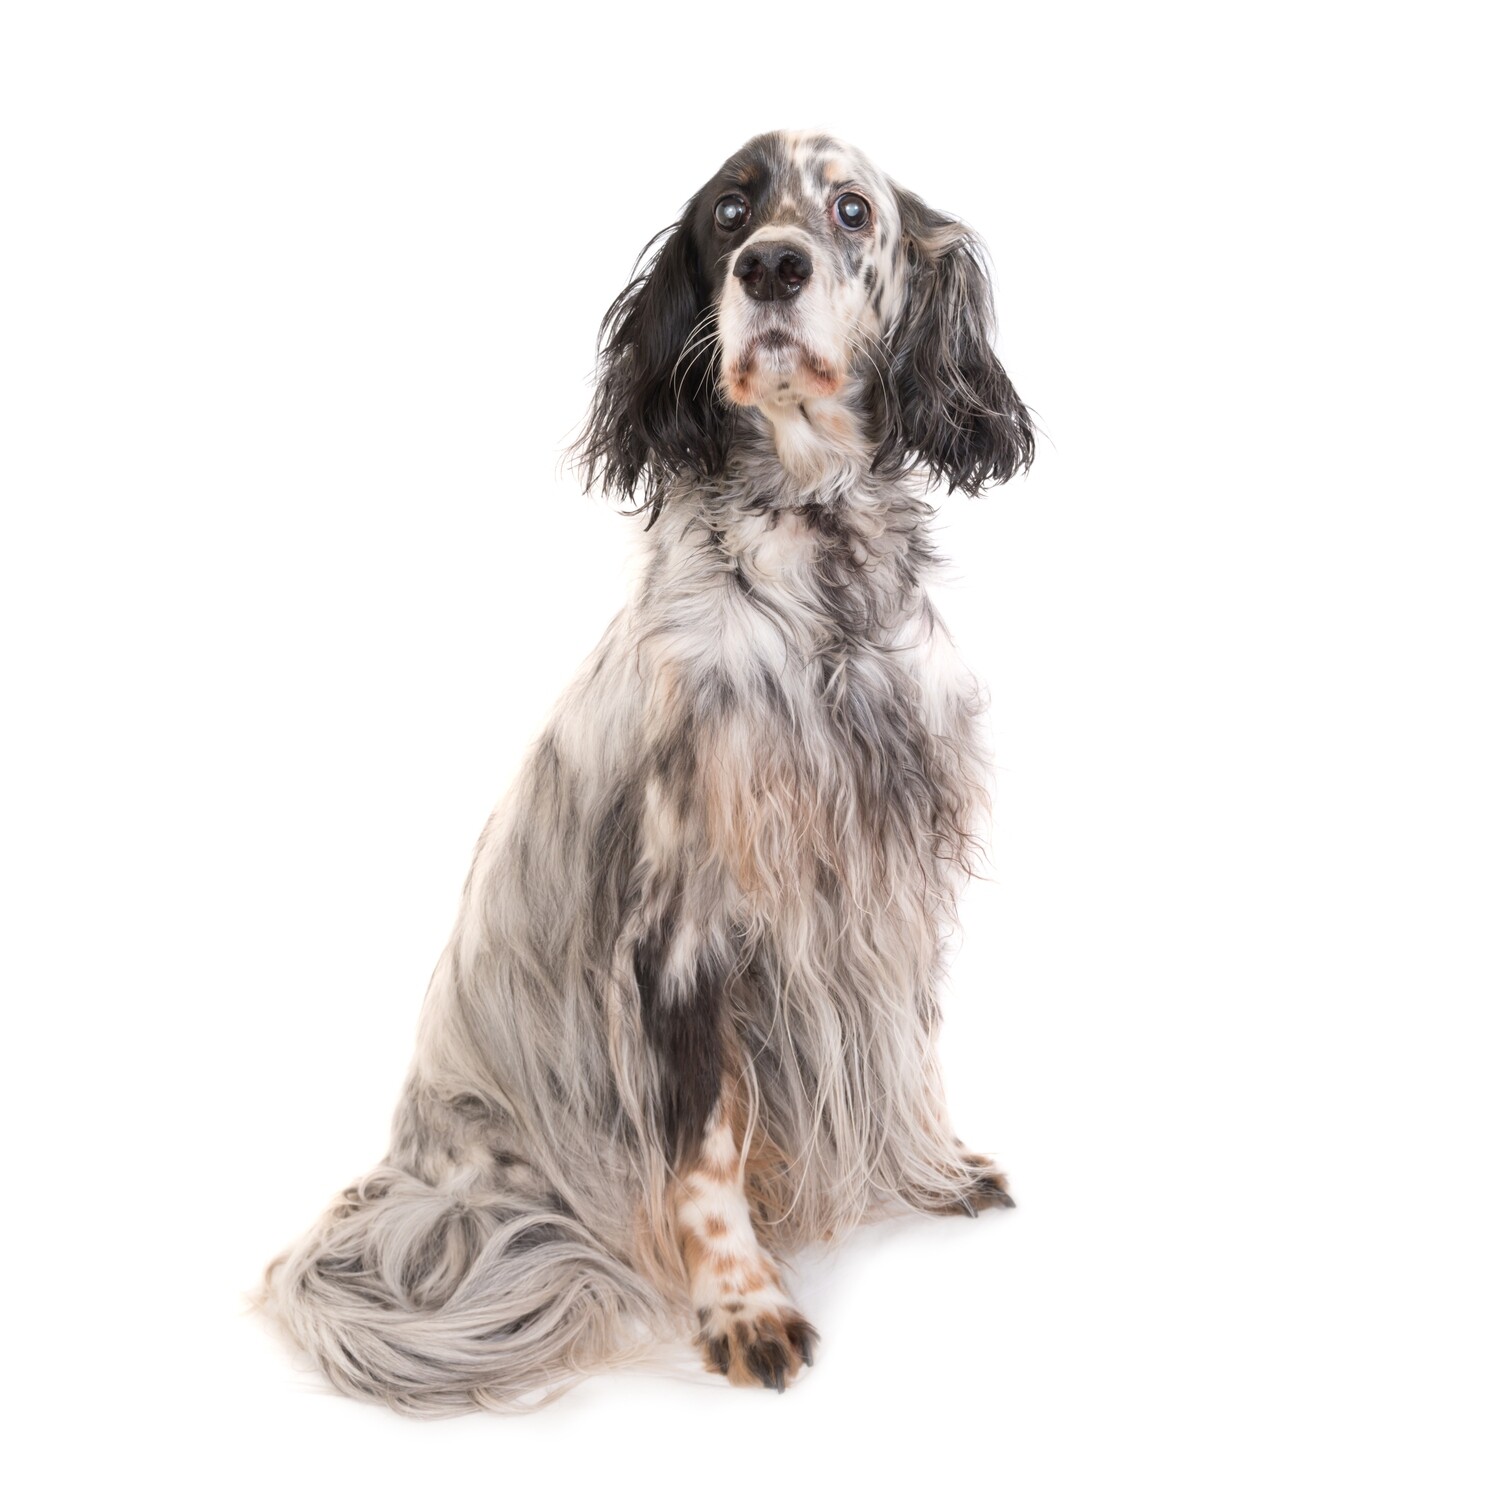 Compensation certificate for 900 kg of CO2 - English Setter